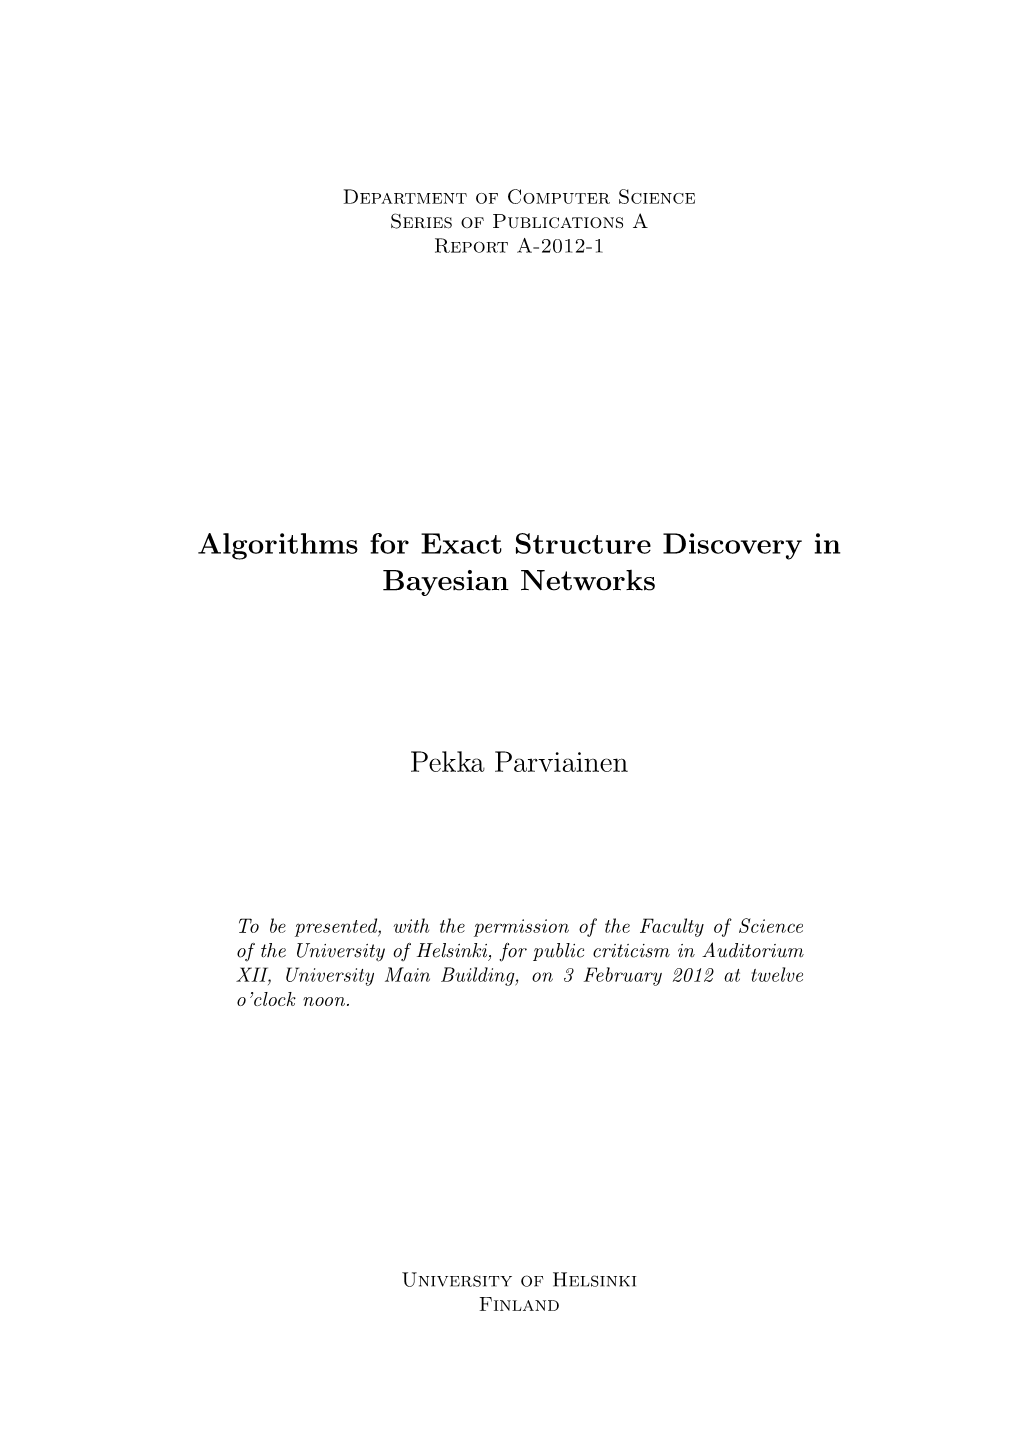 Algorithms for Exact Structure Discovery in Bayesian Networks